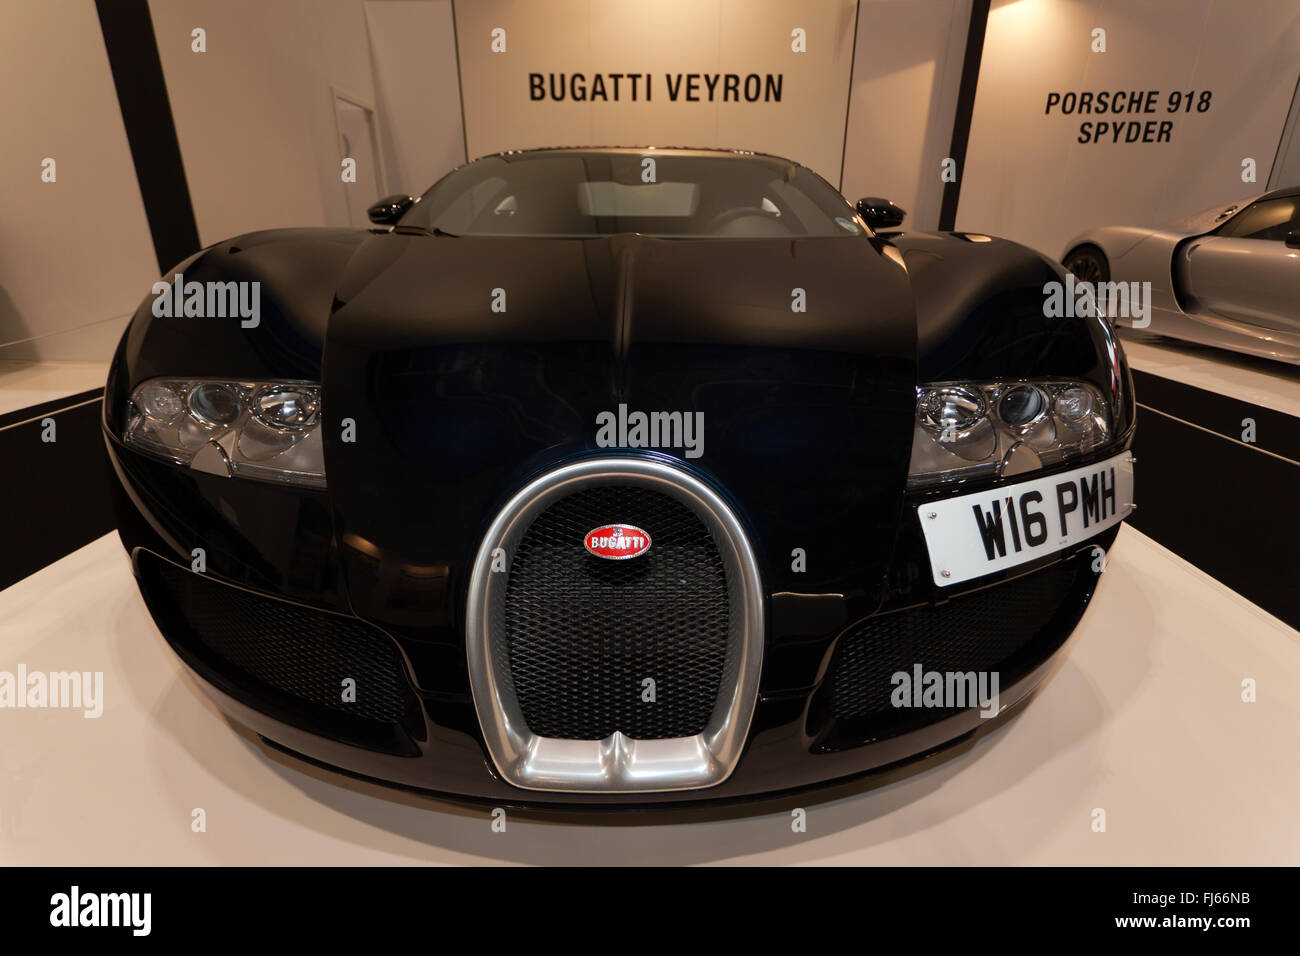 Wide-angle, front view of a Bugatti Veyron, in the 'Evolution of the Supercar' section of the 2016 London Classic Car Show. Stock Photo